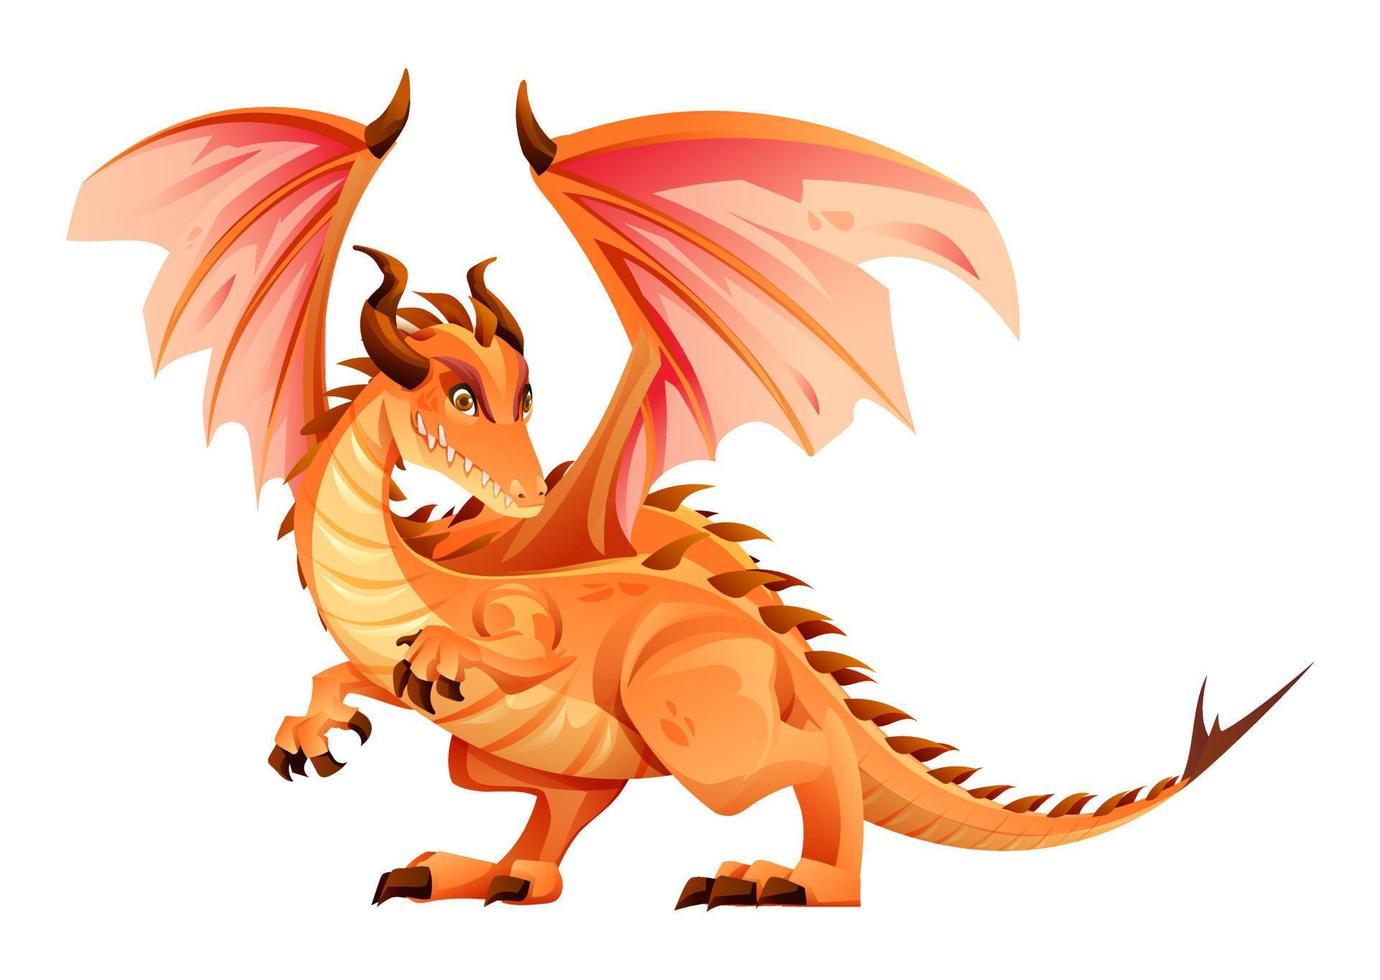 Dragon character in cartoon style vector